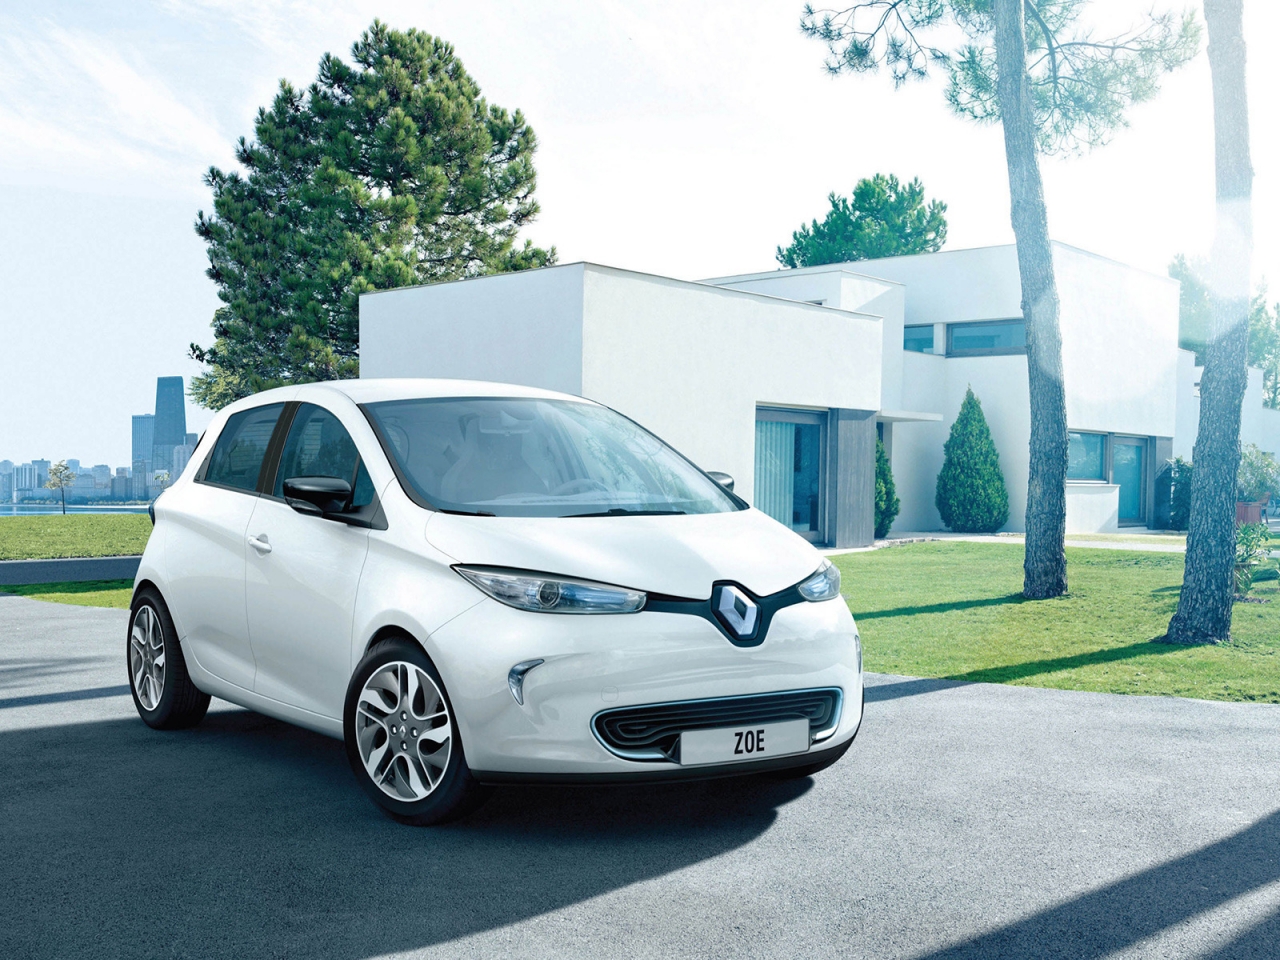 2013 Renault Zoe for 1280 x 960 resolution